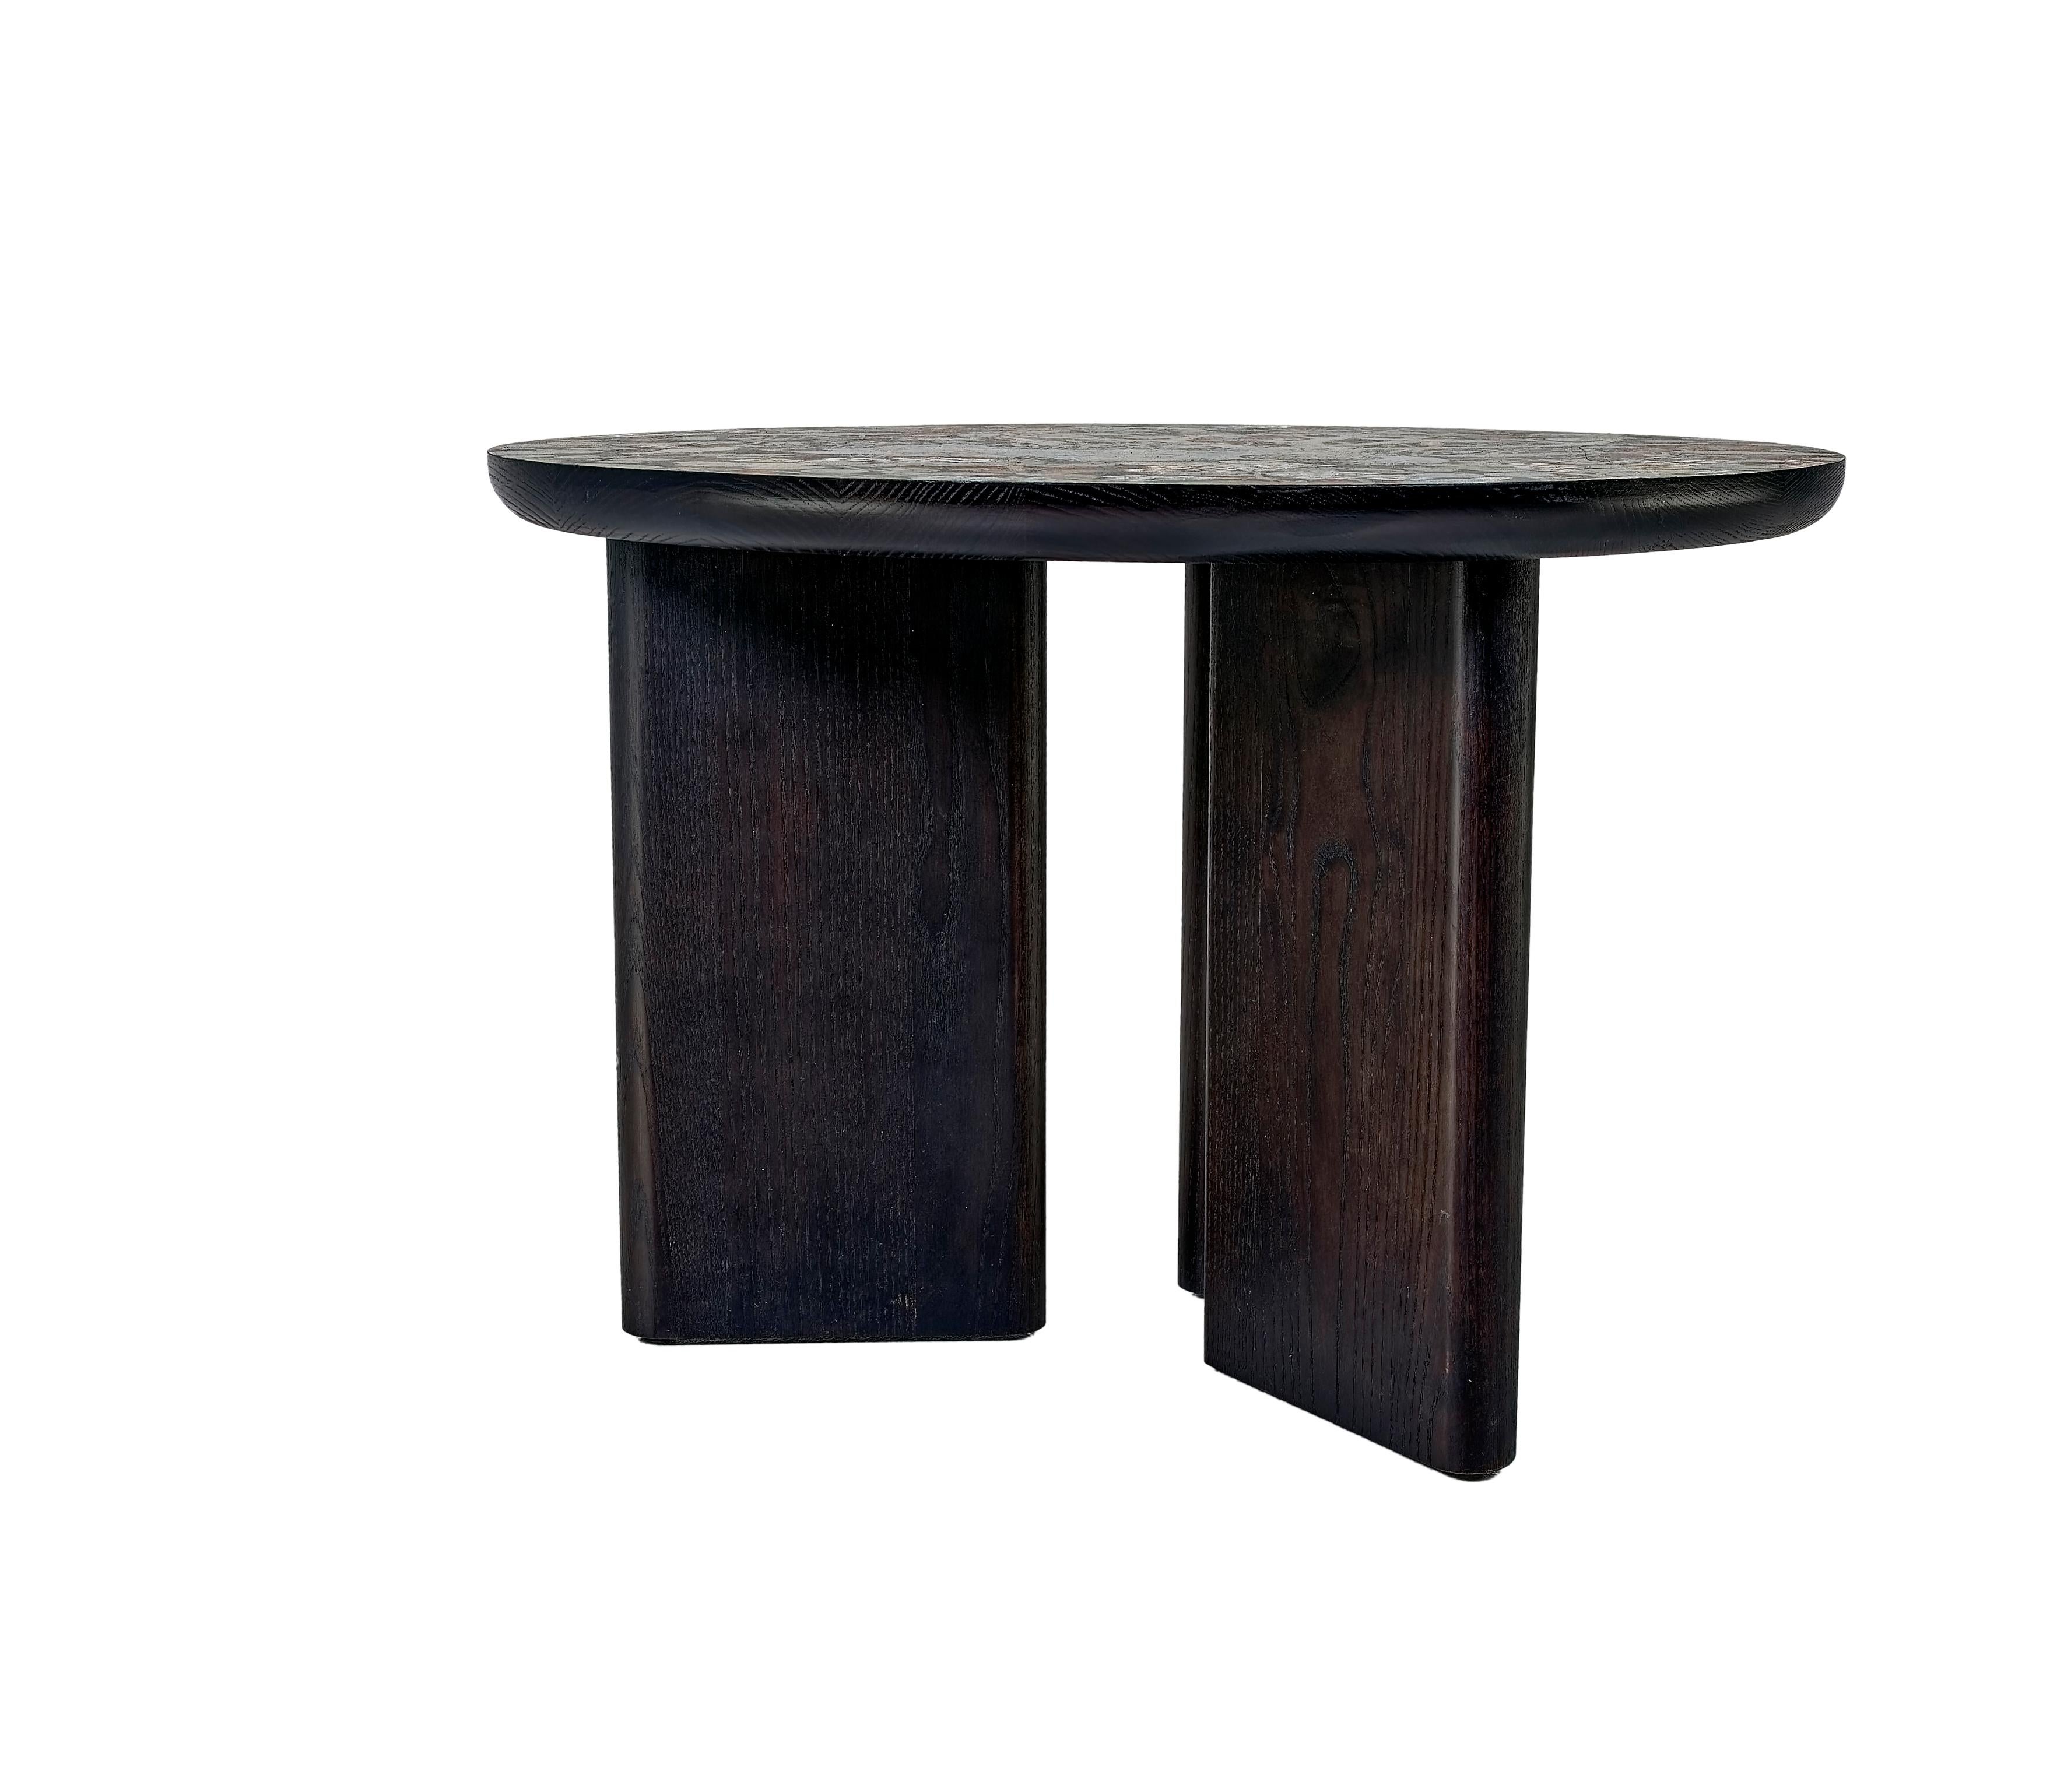 Three-legged Modern Side Table, Ebonized Oak. Top is covered with original Josef Frank Wallpaper and several layers of clear finish. Matching coffee table available, please see pictures.